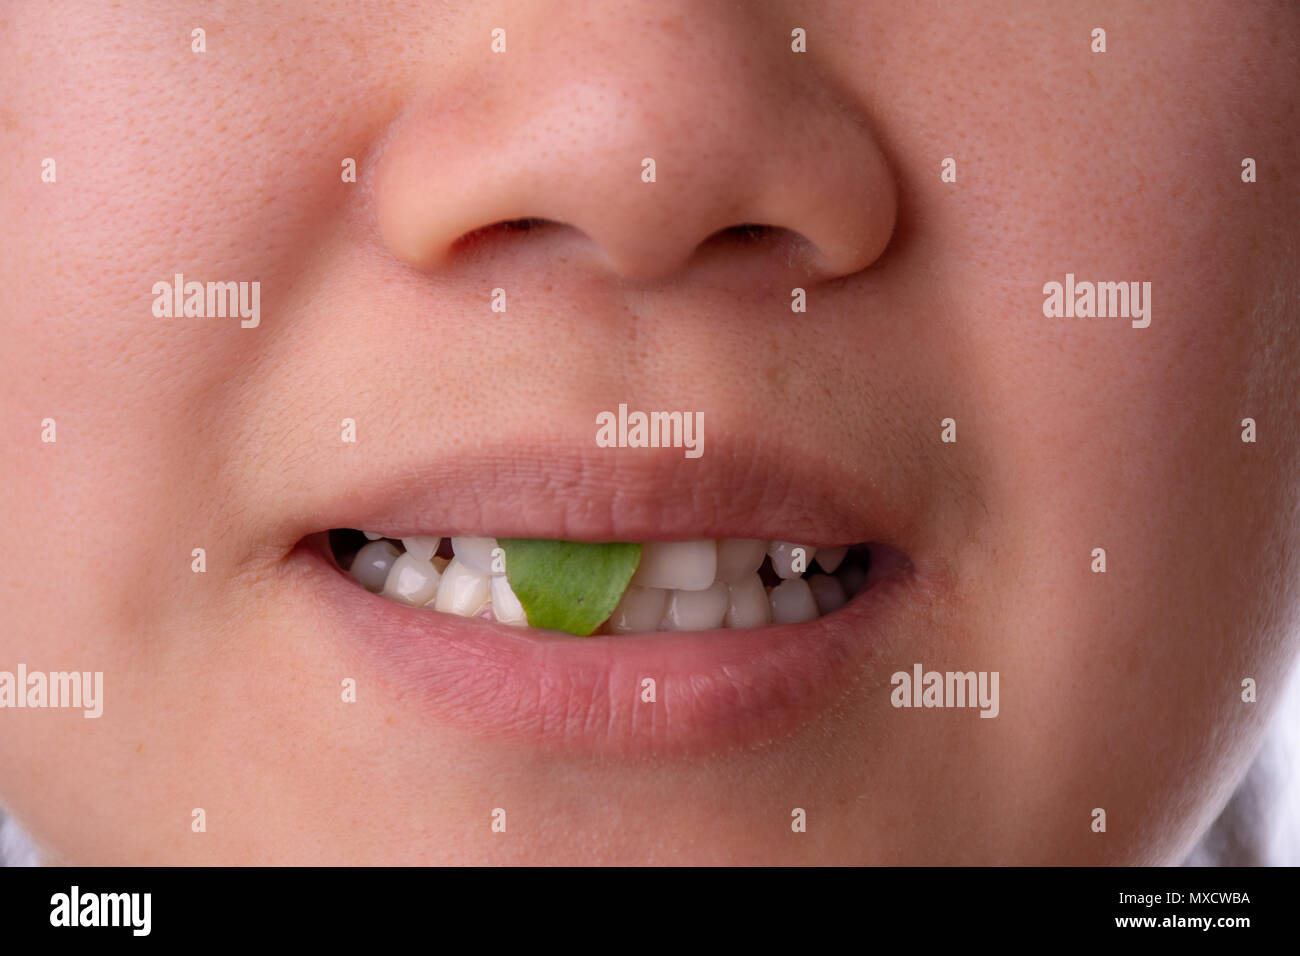 Close-up of woman smiling with spinach or salad stuck in her teeth Stock Photo